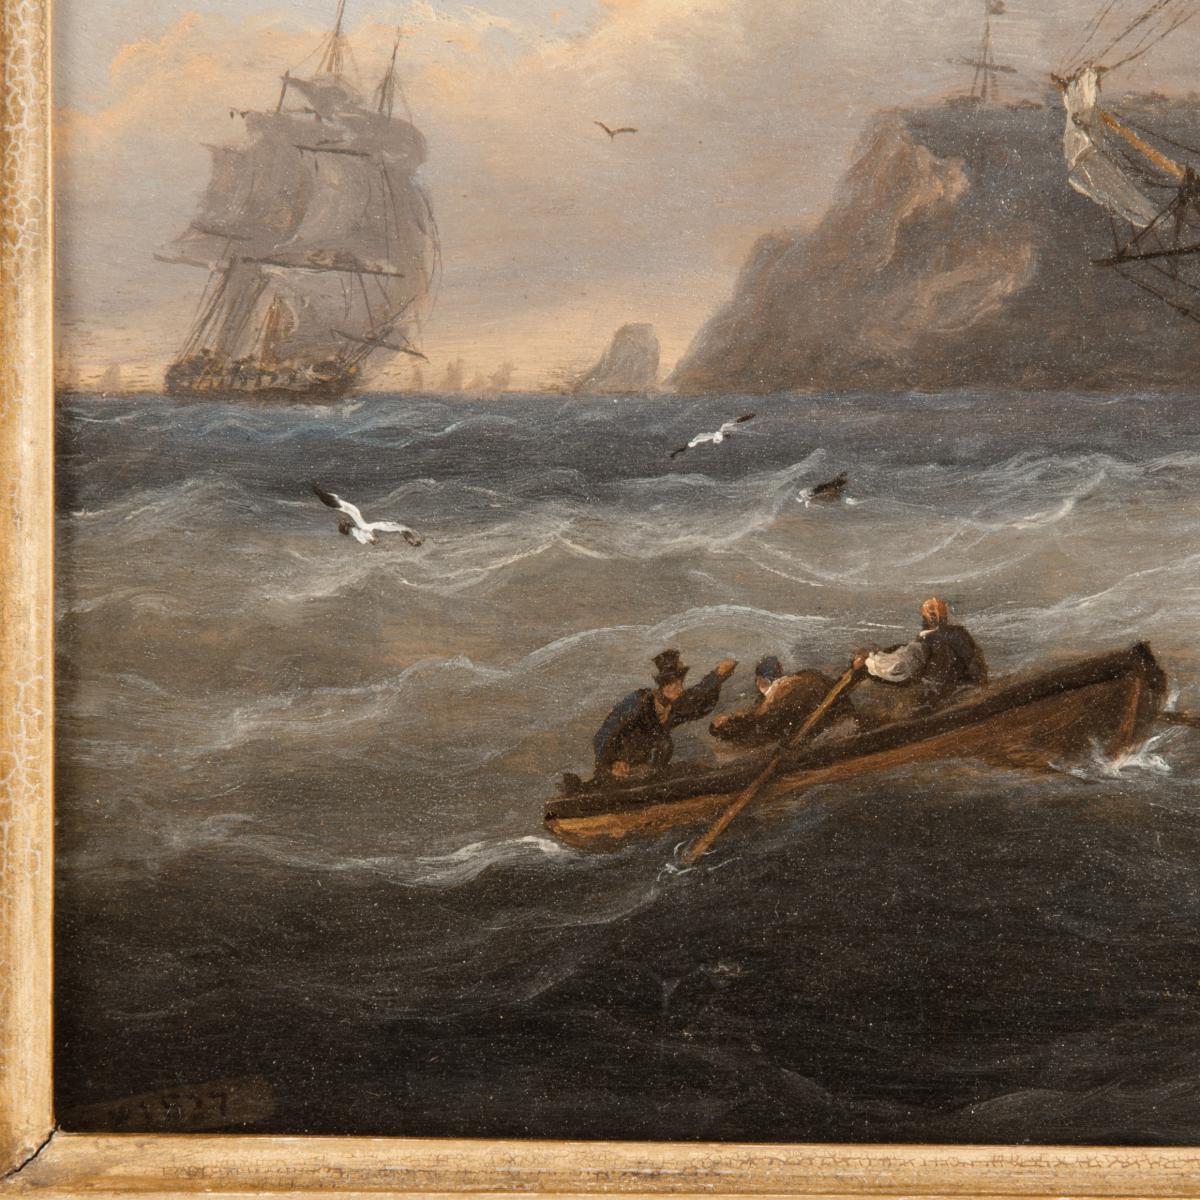 Thomas Luny – HMS Bellerophon leaving Torbay with the defeated Emperor Napoleon aboard